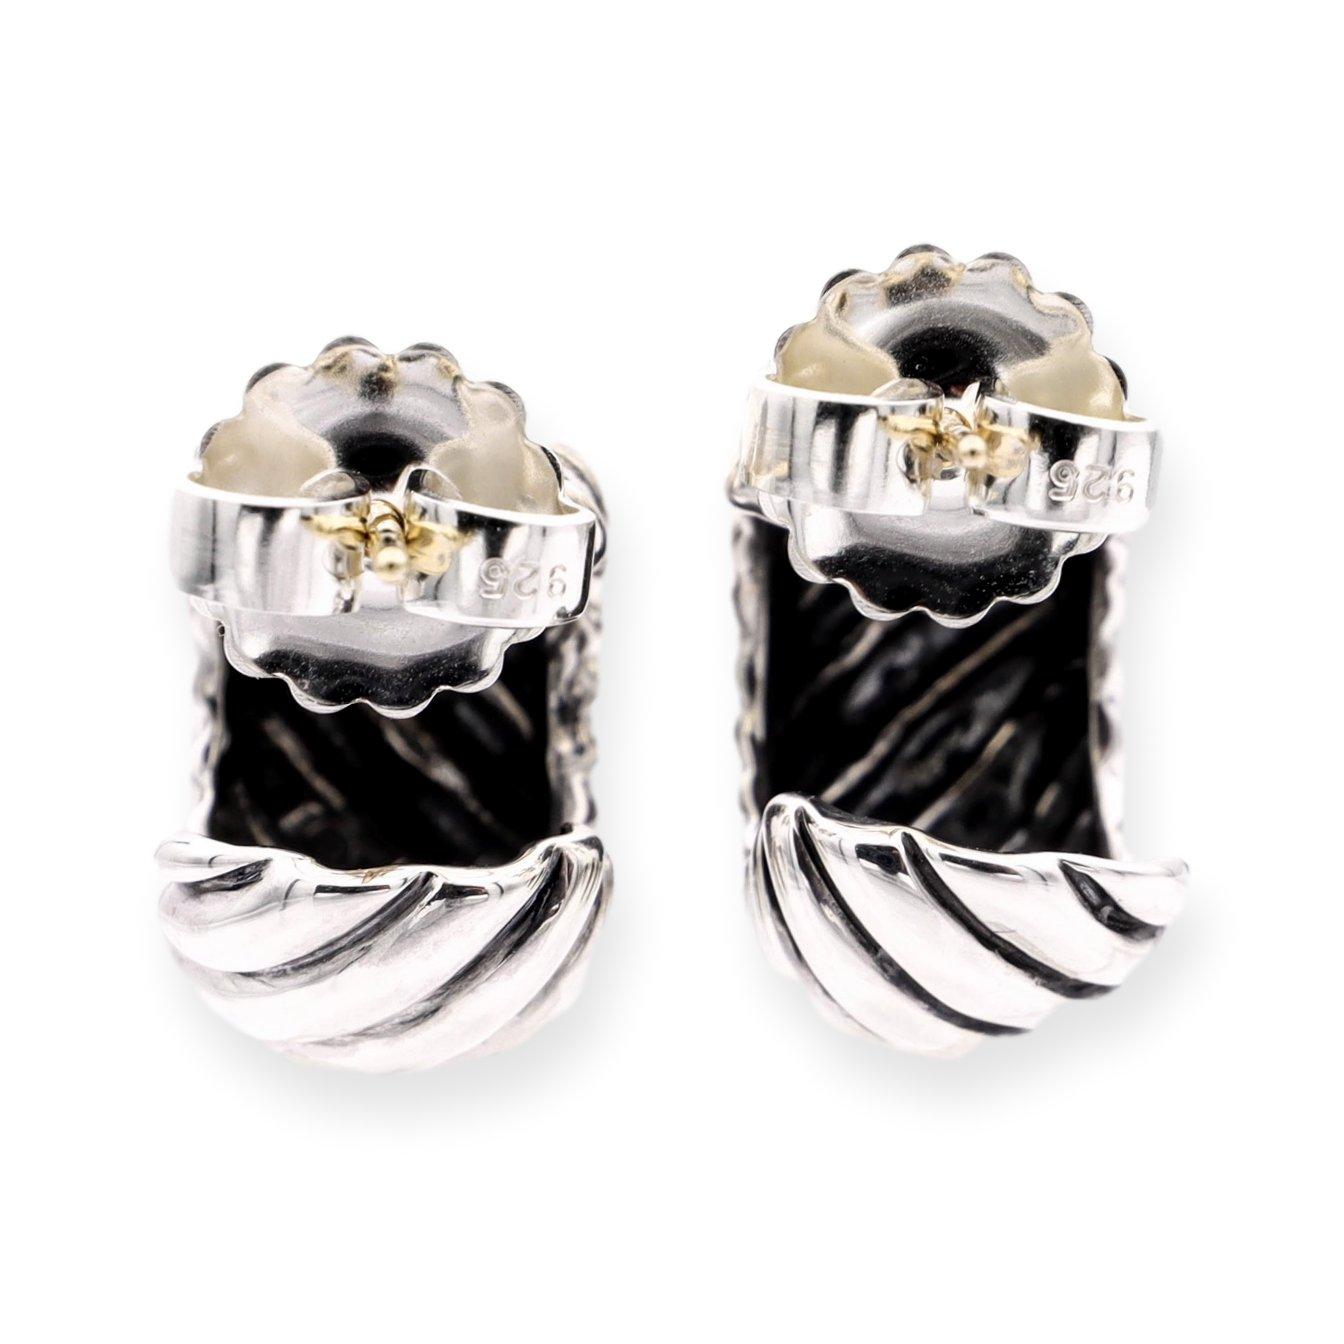 David Yurman pair of shrimp style earrings finely crafted from solid sterling silver in a fine polished finish with a twisted cable design. The earrings boast a chubby curved semi hoop design with 14 karat gold posts and push in large butterfly